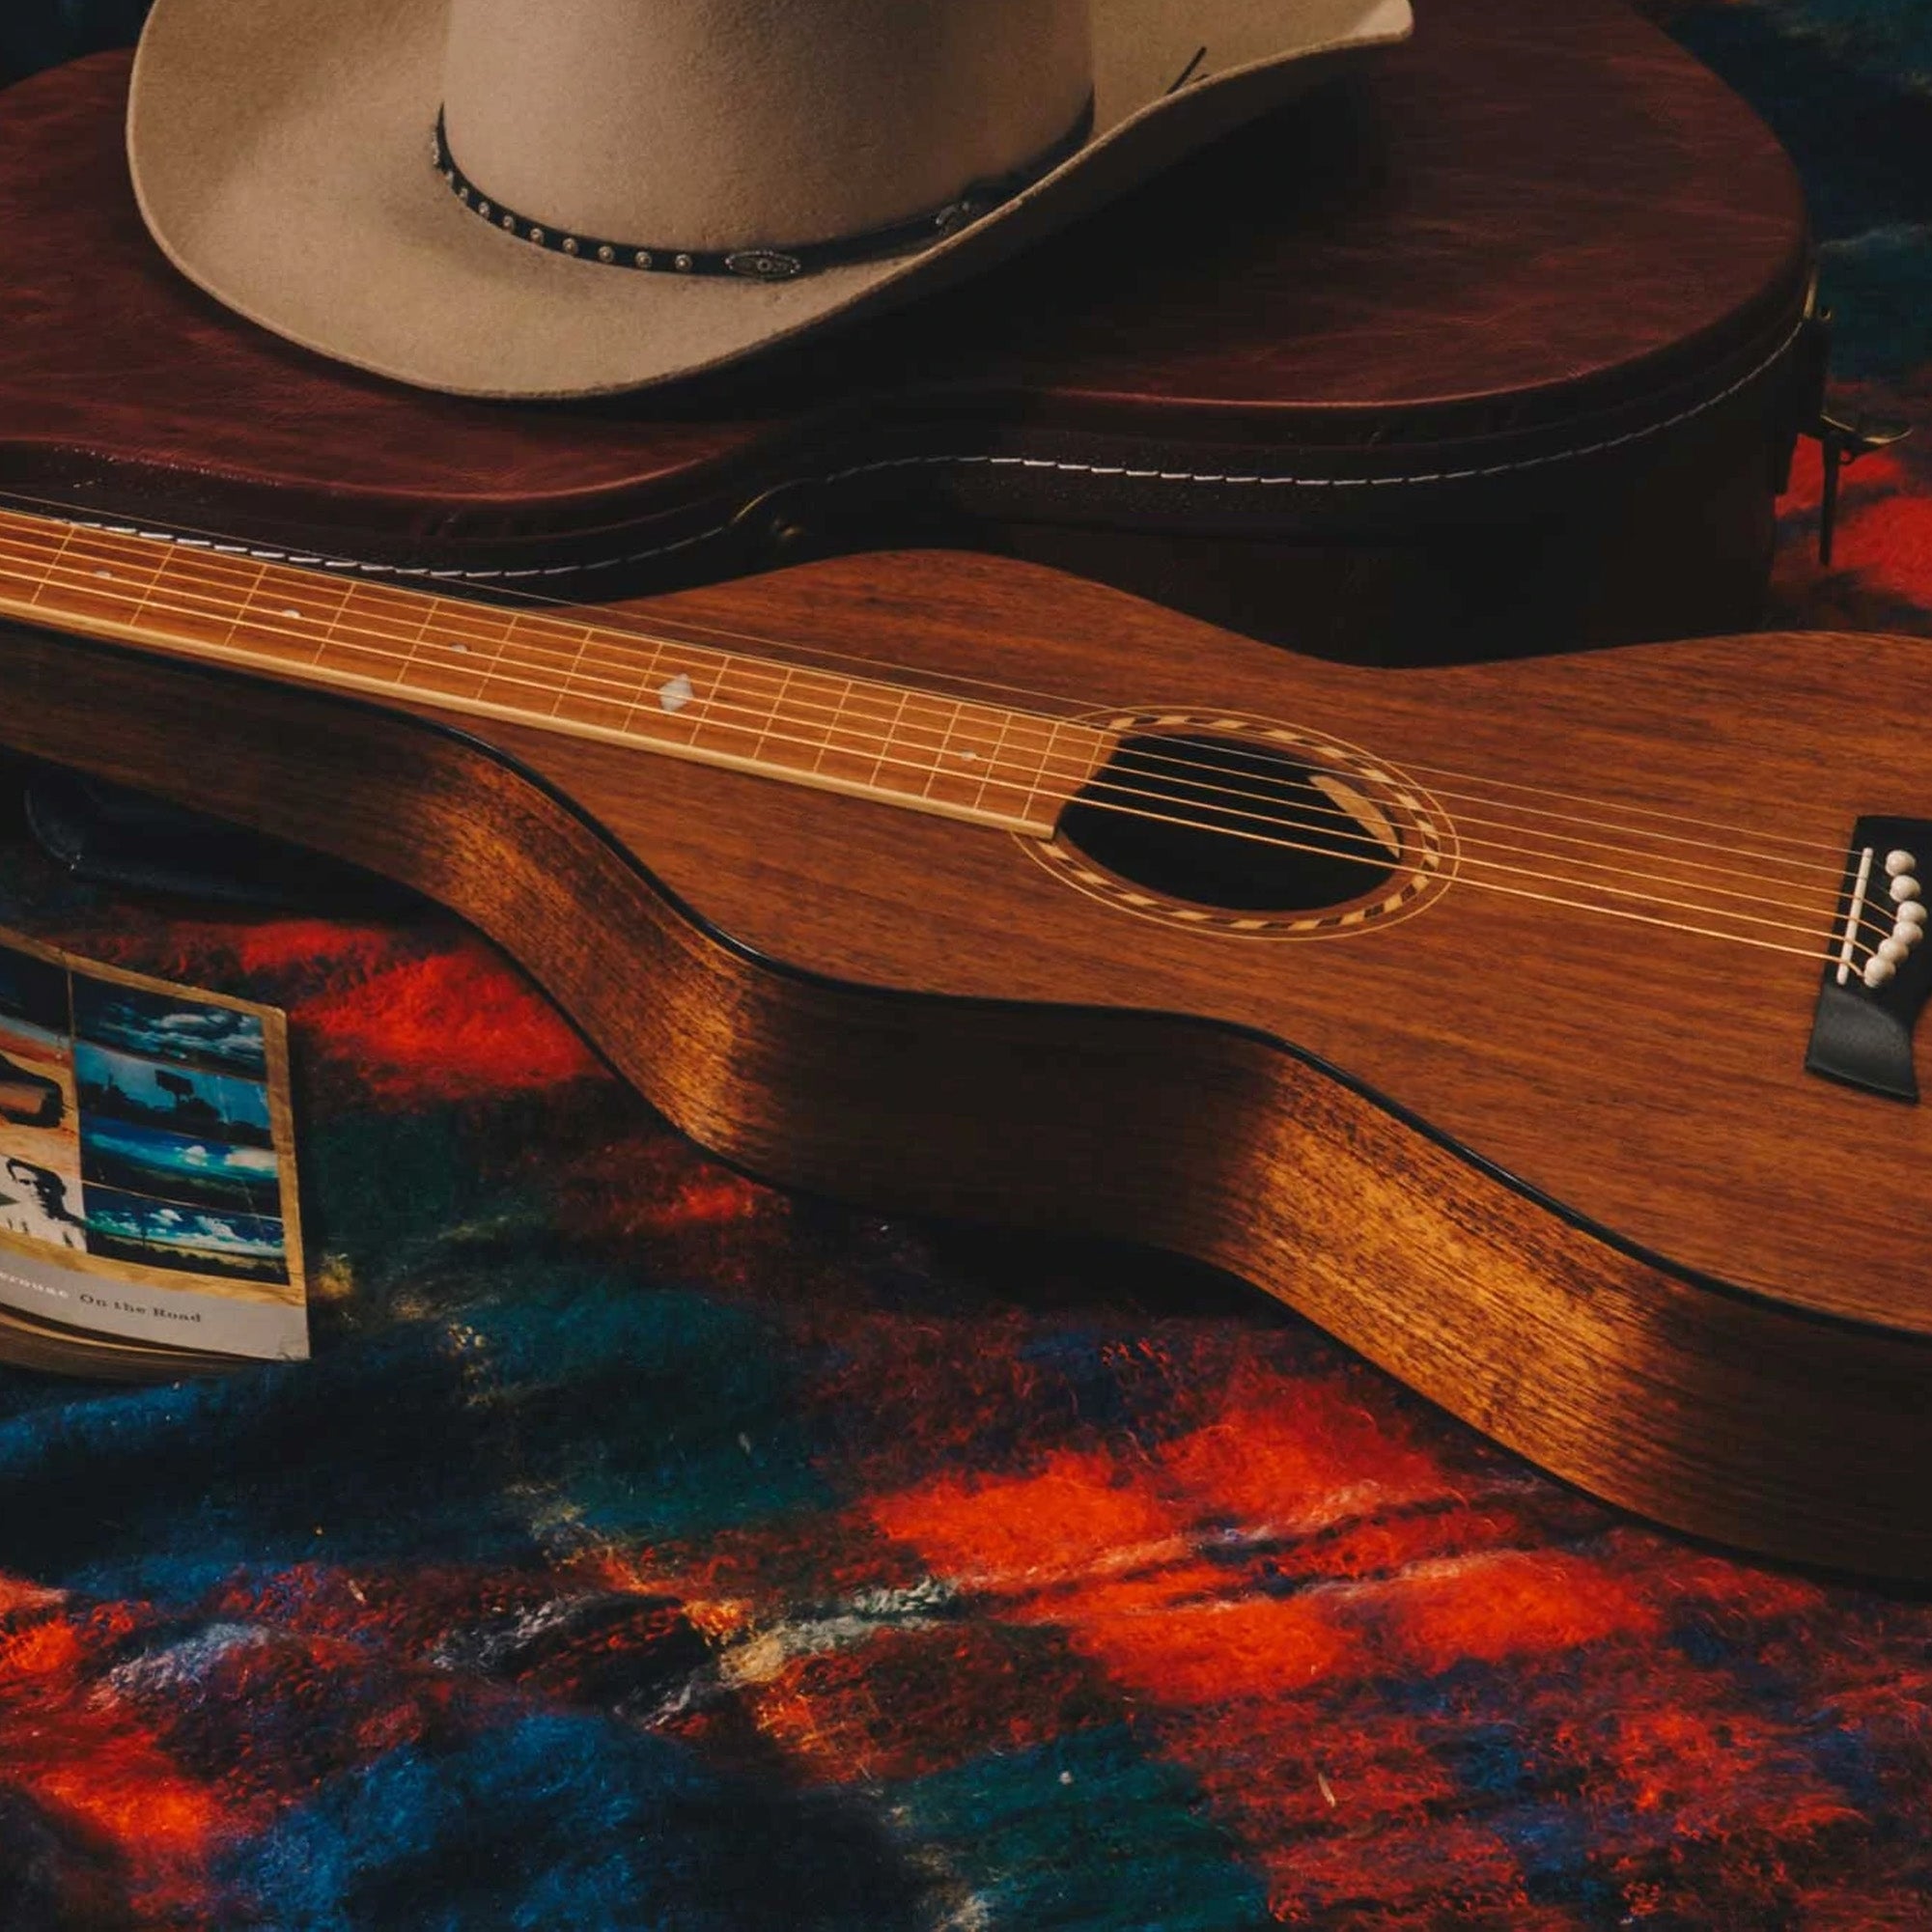 Style 2 Richard Wilson Weissenborn guitar on a picnic rug with a cowboy hat